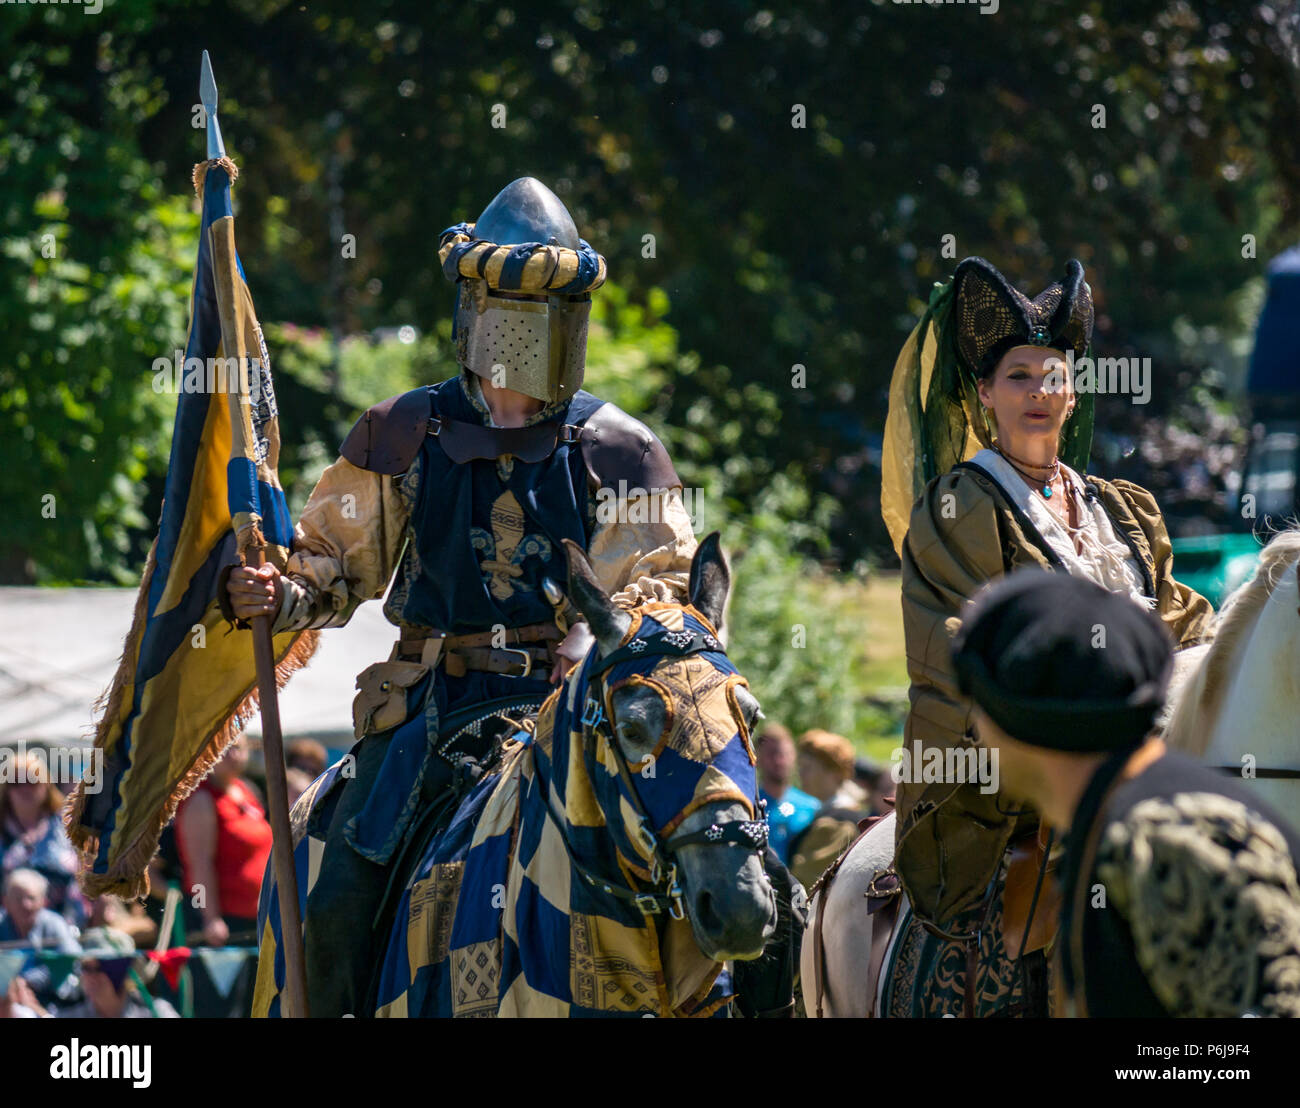 Jousting and Medieval Fair at Linlithgow Palace, Linlithgow, Scotland, United Kingdom, 30th June 2018. Historic Environment Scotland kick off their summer entertainment programme with a fabulous display of Medieval jousting in the grounds of the historic castle. The jousting is performed by Les Amis D'Onno equine stunt team. A knight wearing a helmet on a horse and a medieval lady on a white horse Stock Photo